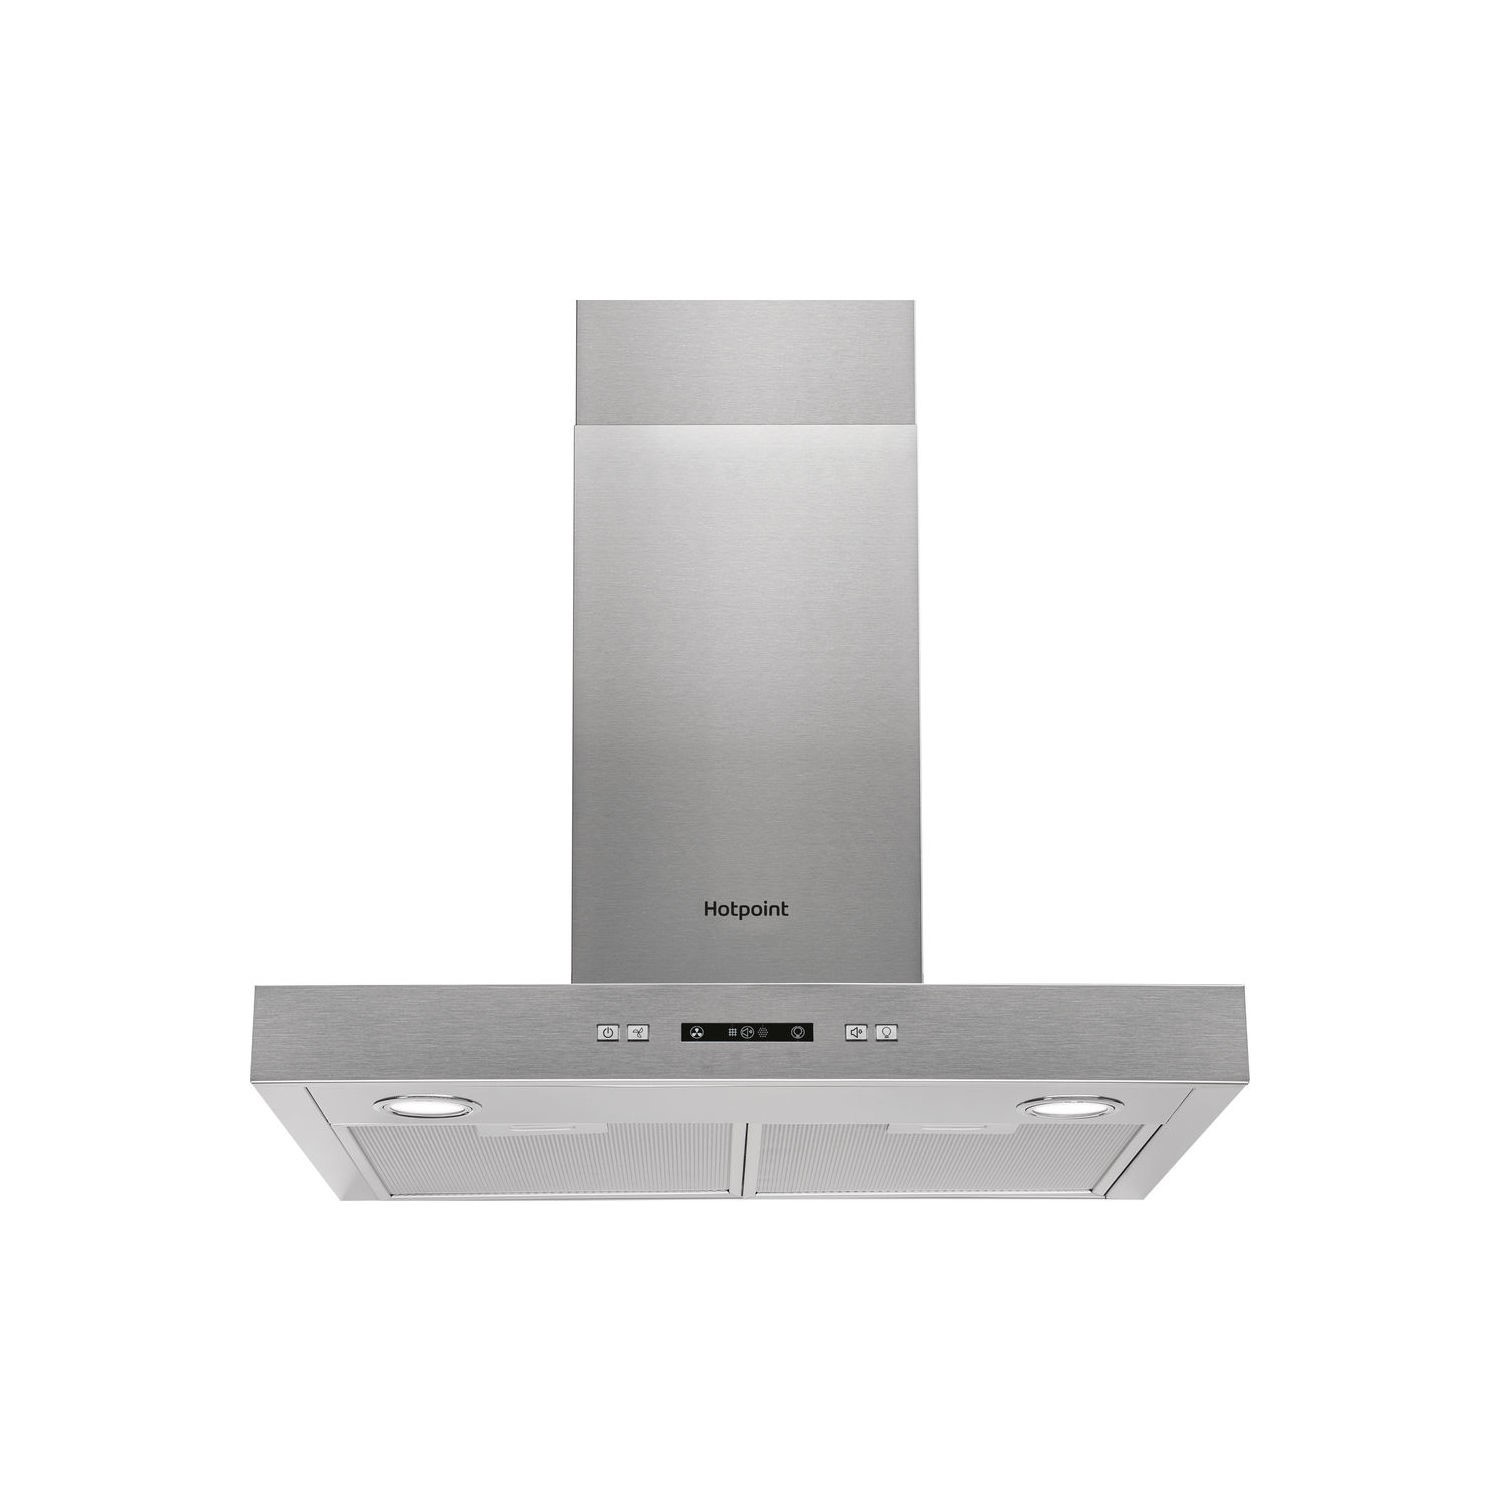 Refurbished Hotpoint PHBS67FLLIX 60cm Chimney Cooker Hood Stainless Steel